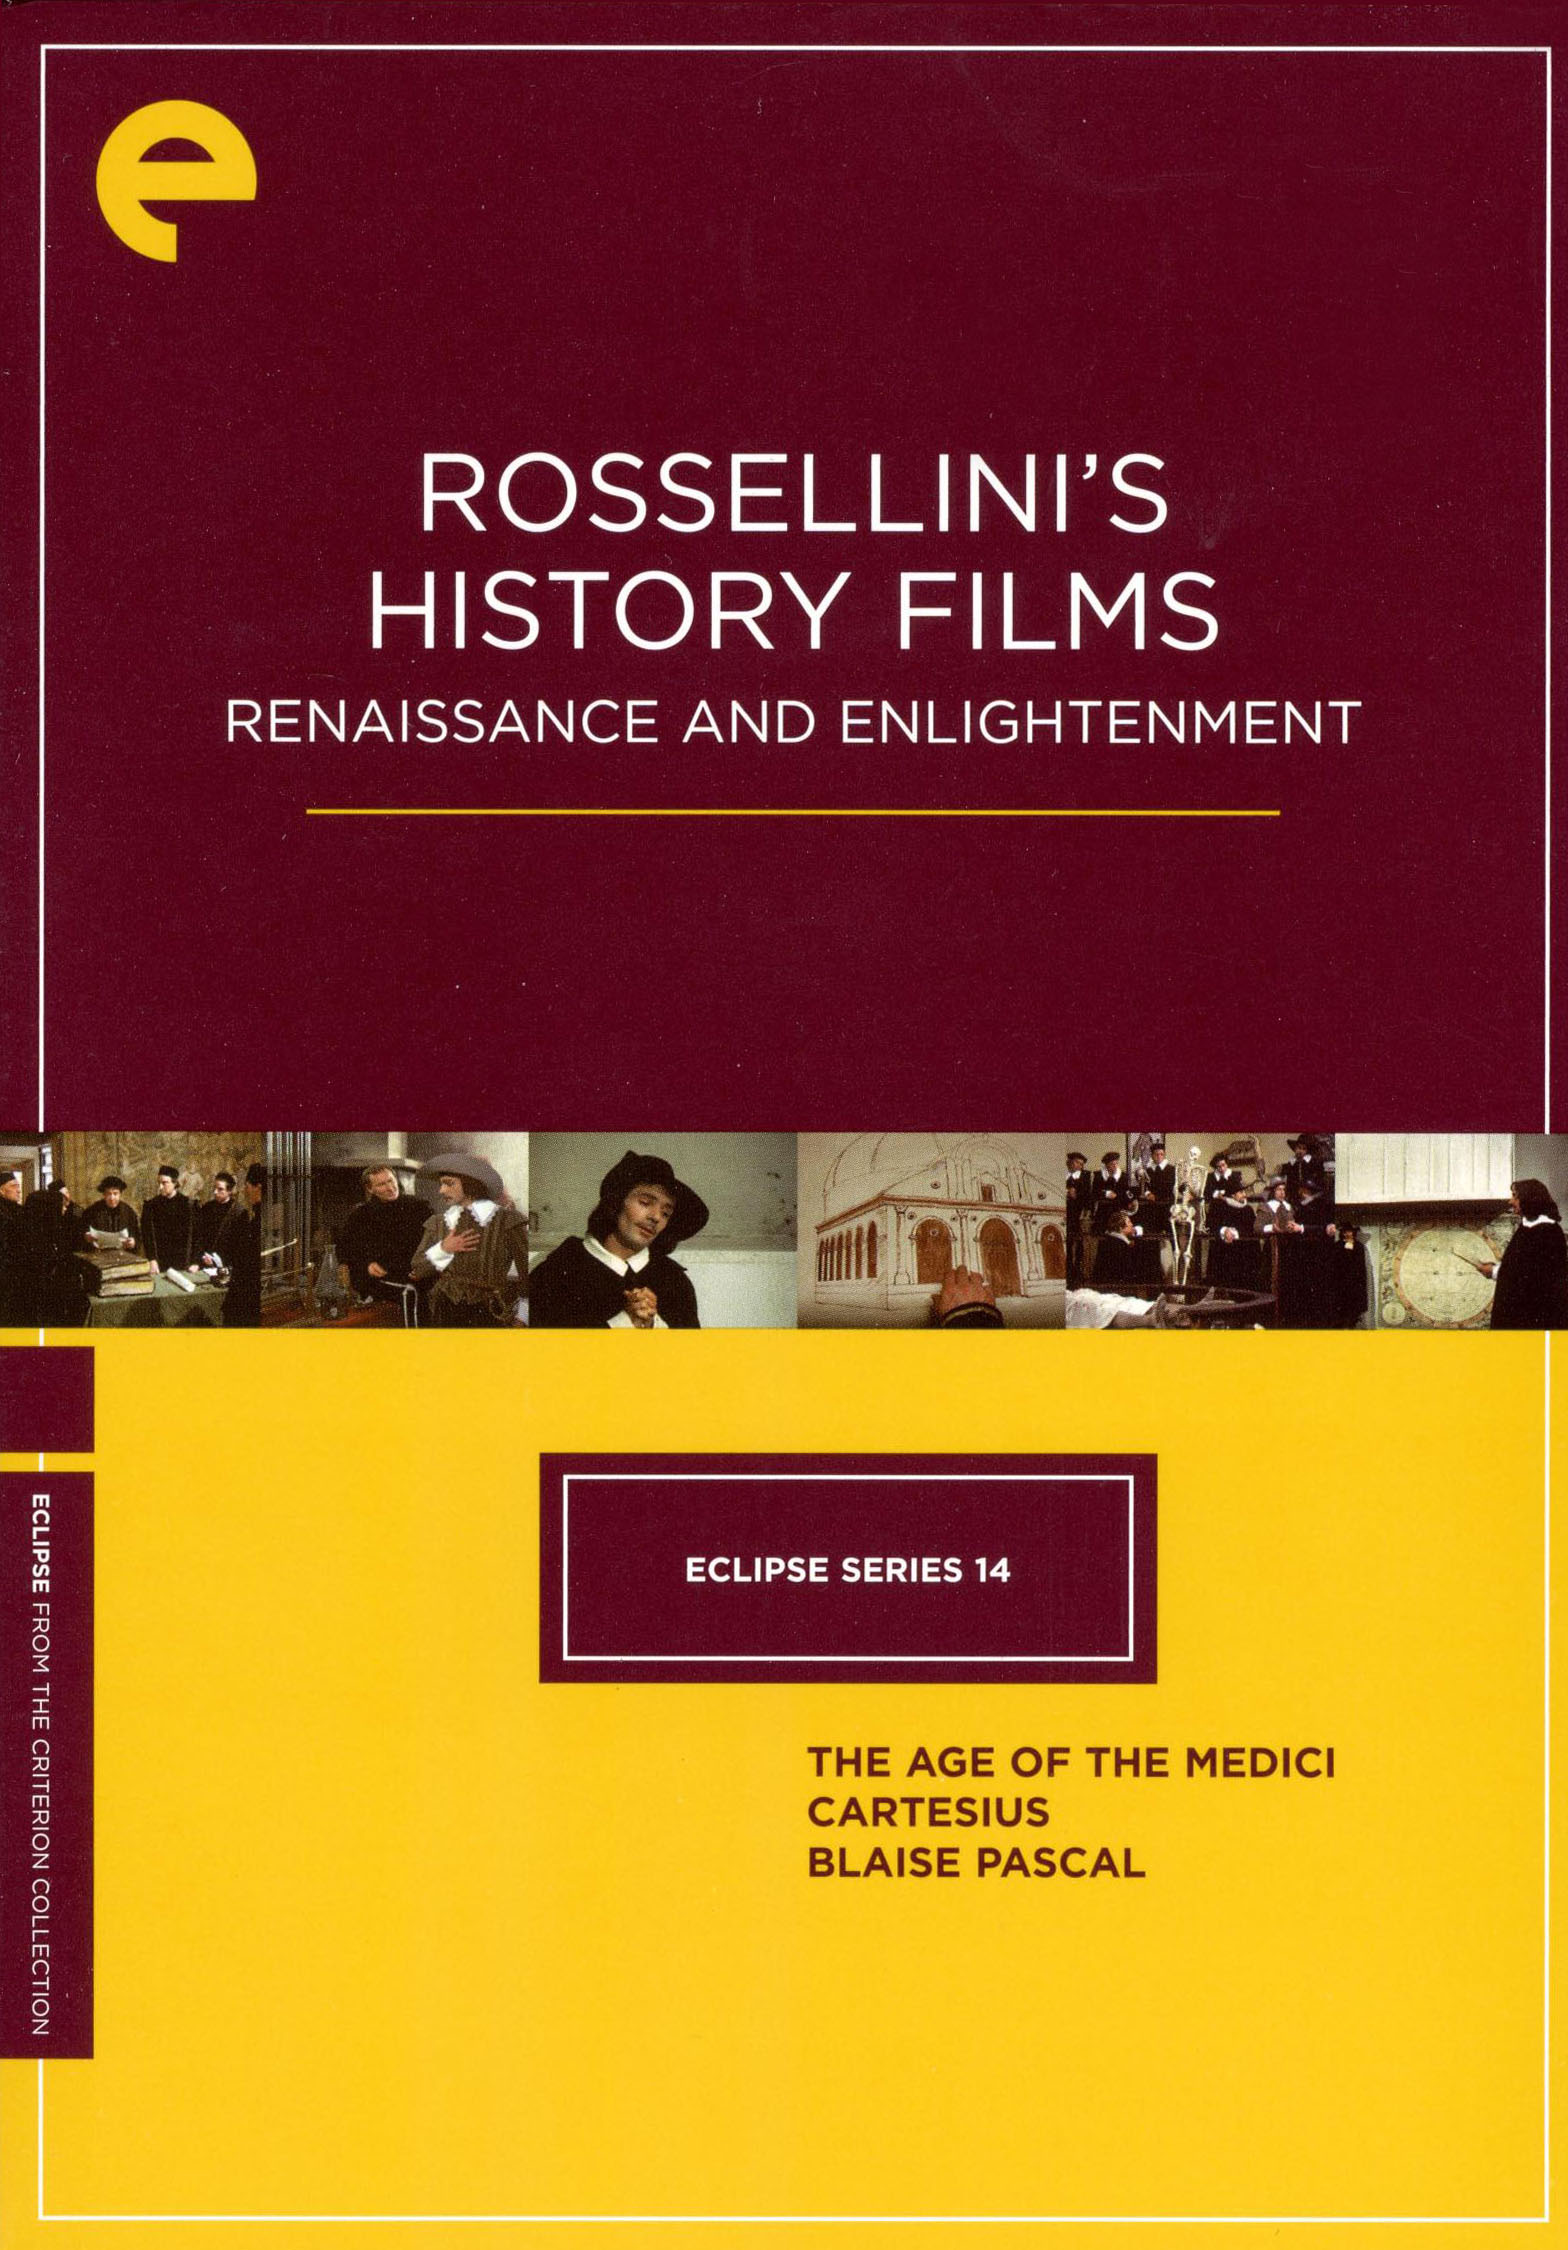 Rossellini's History Films: Renaissance and Enlightenment [Criterion Collection] [DVD]